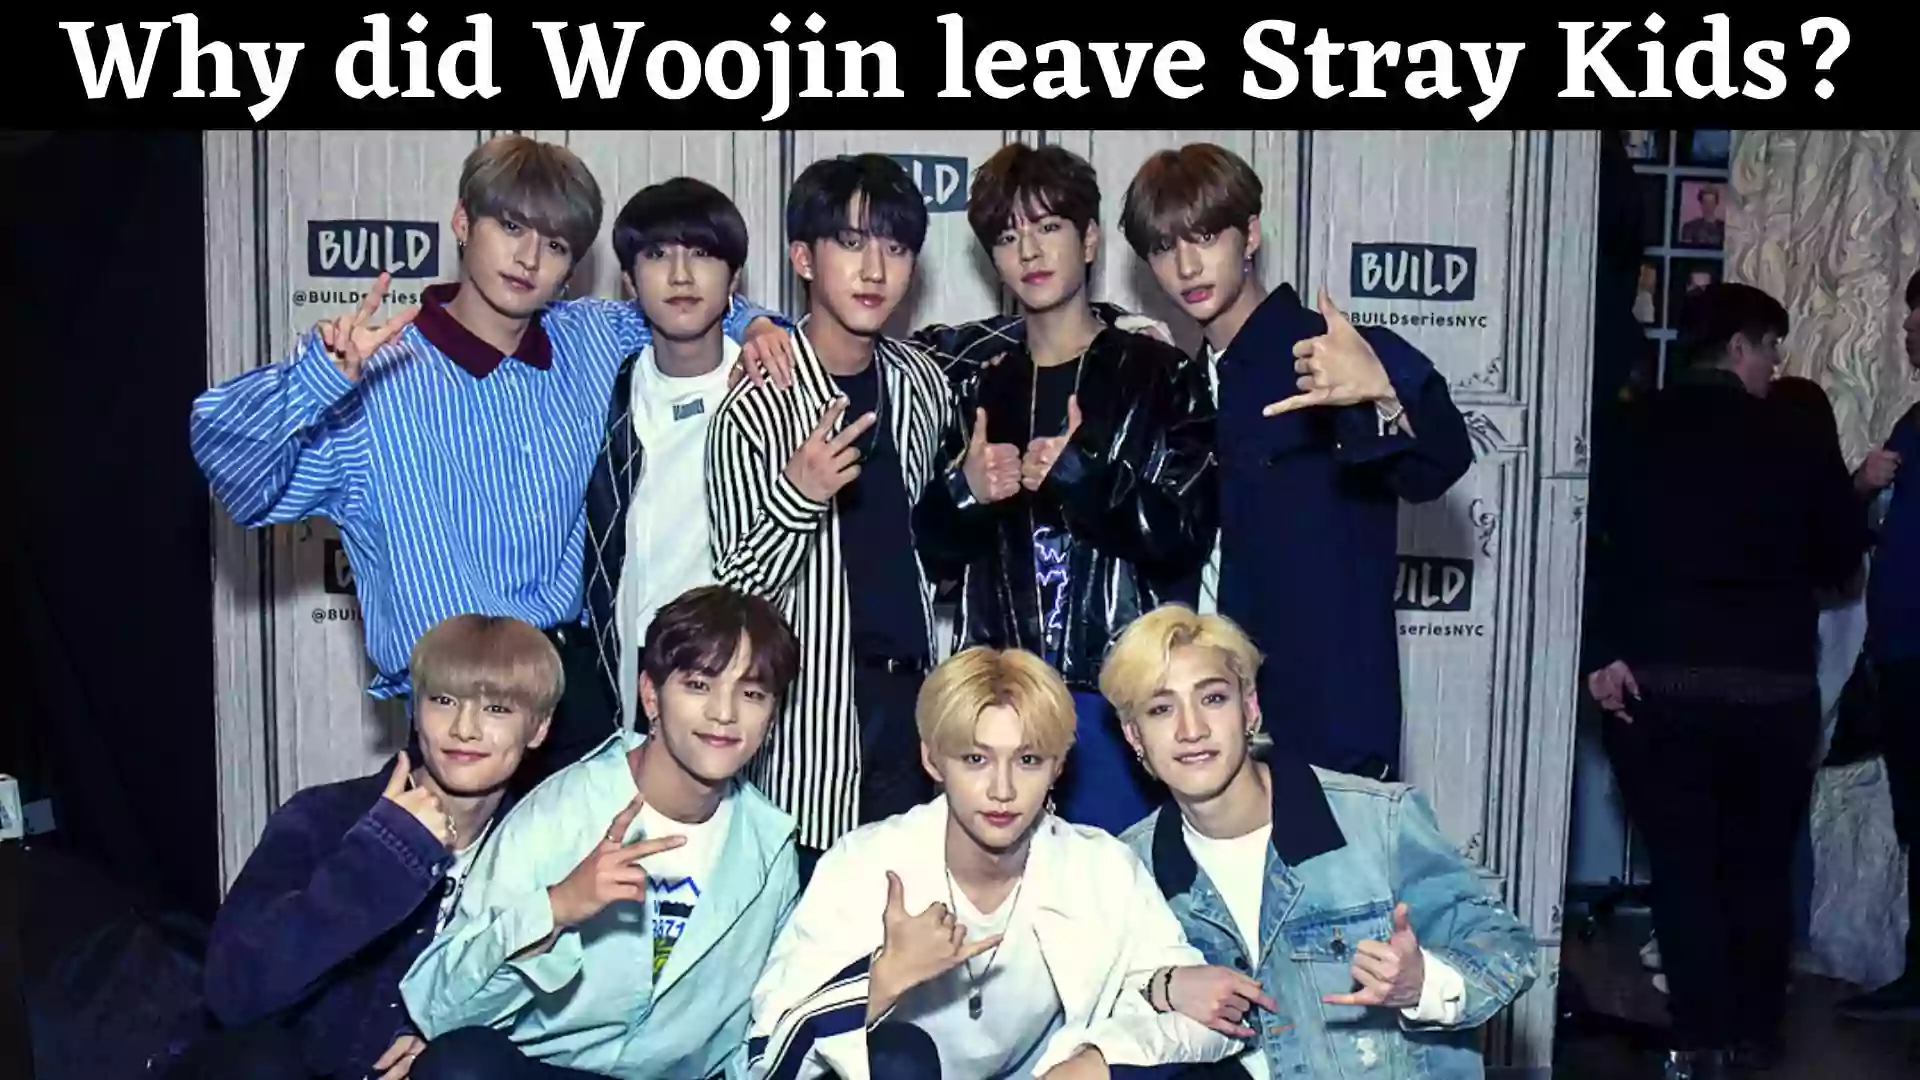 Why did Woojin leave Stray Kids?